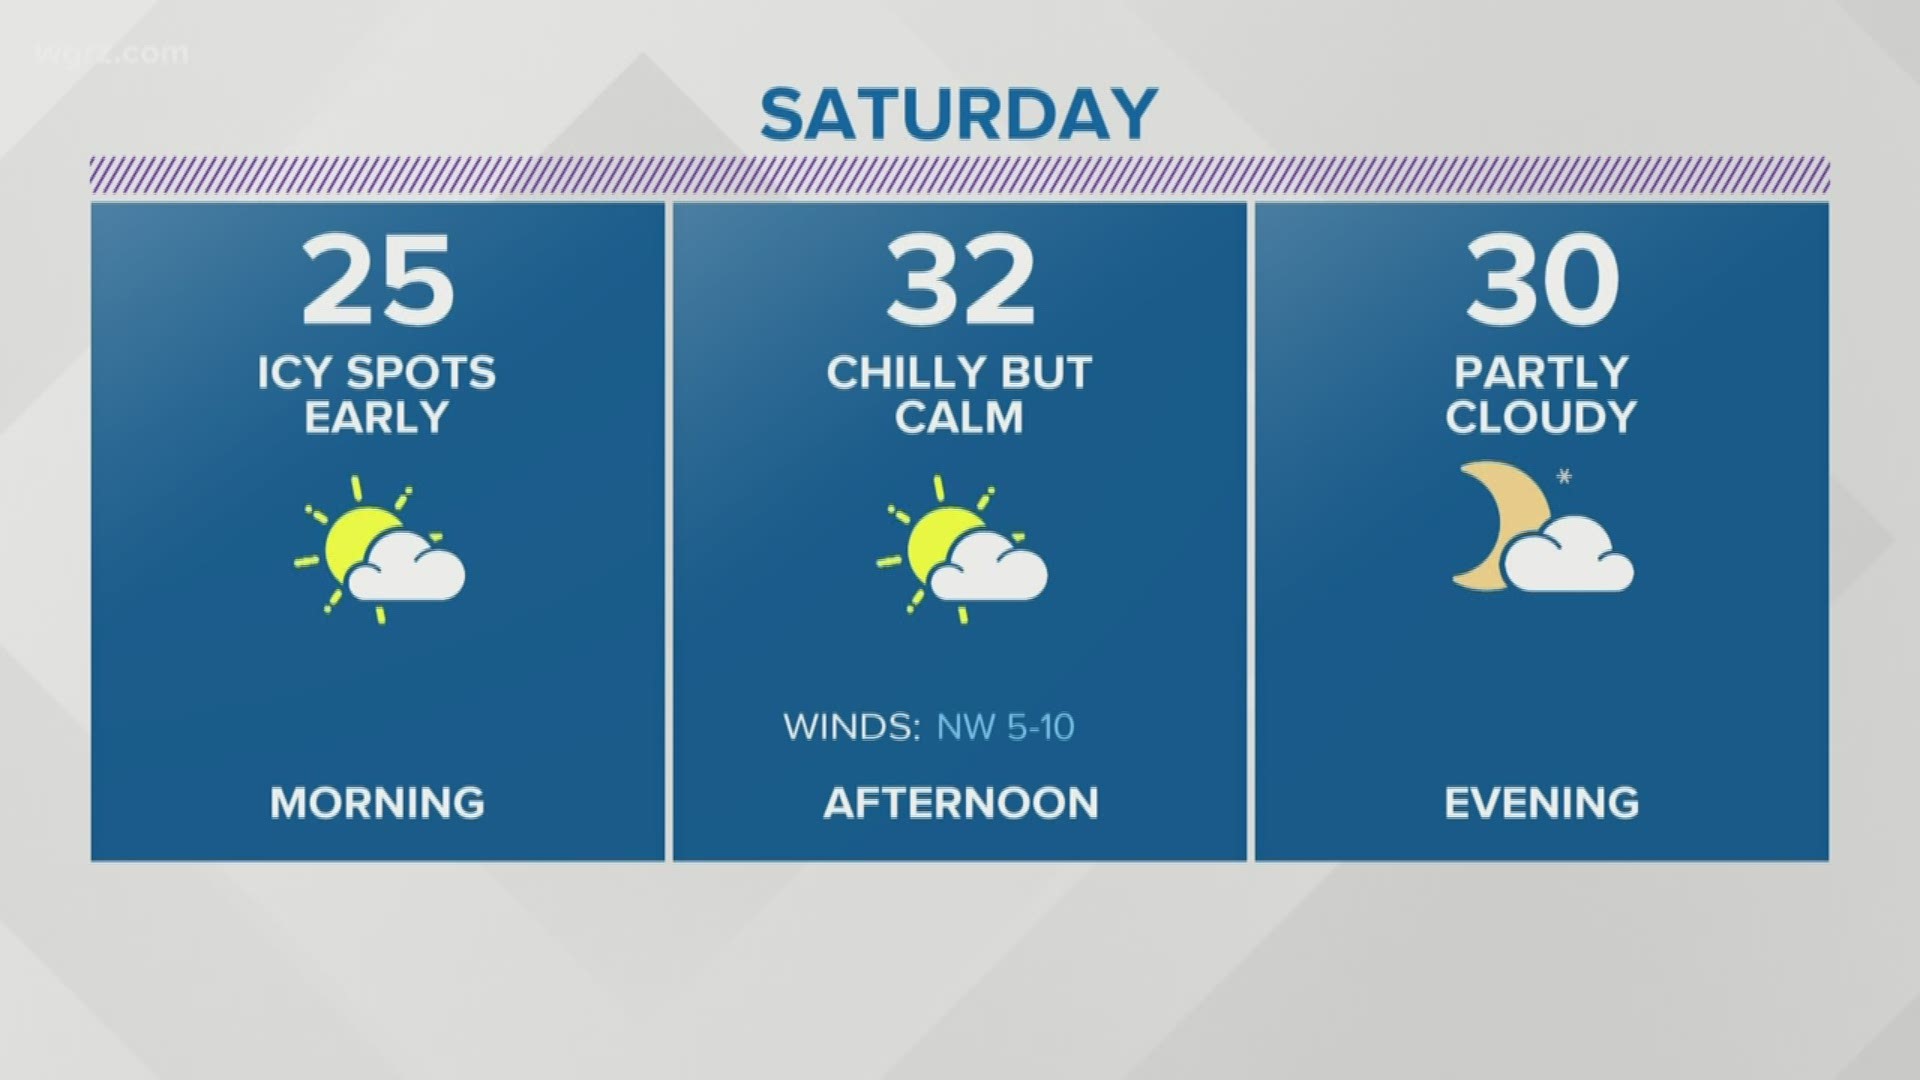 Saturday morning starts off icy, then leads to a chilly but calm afternoon at 32 degrees and picks up into the 40's on Sunday.